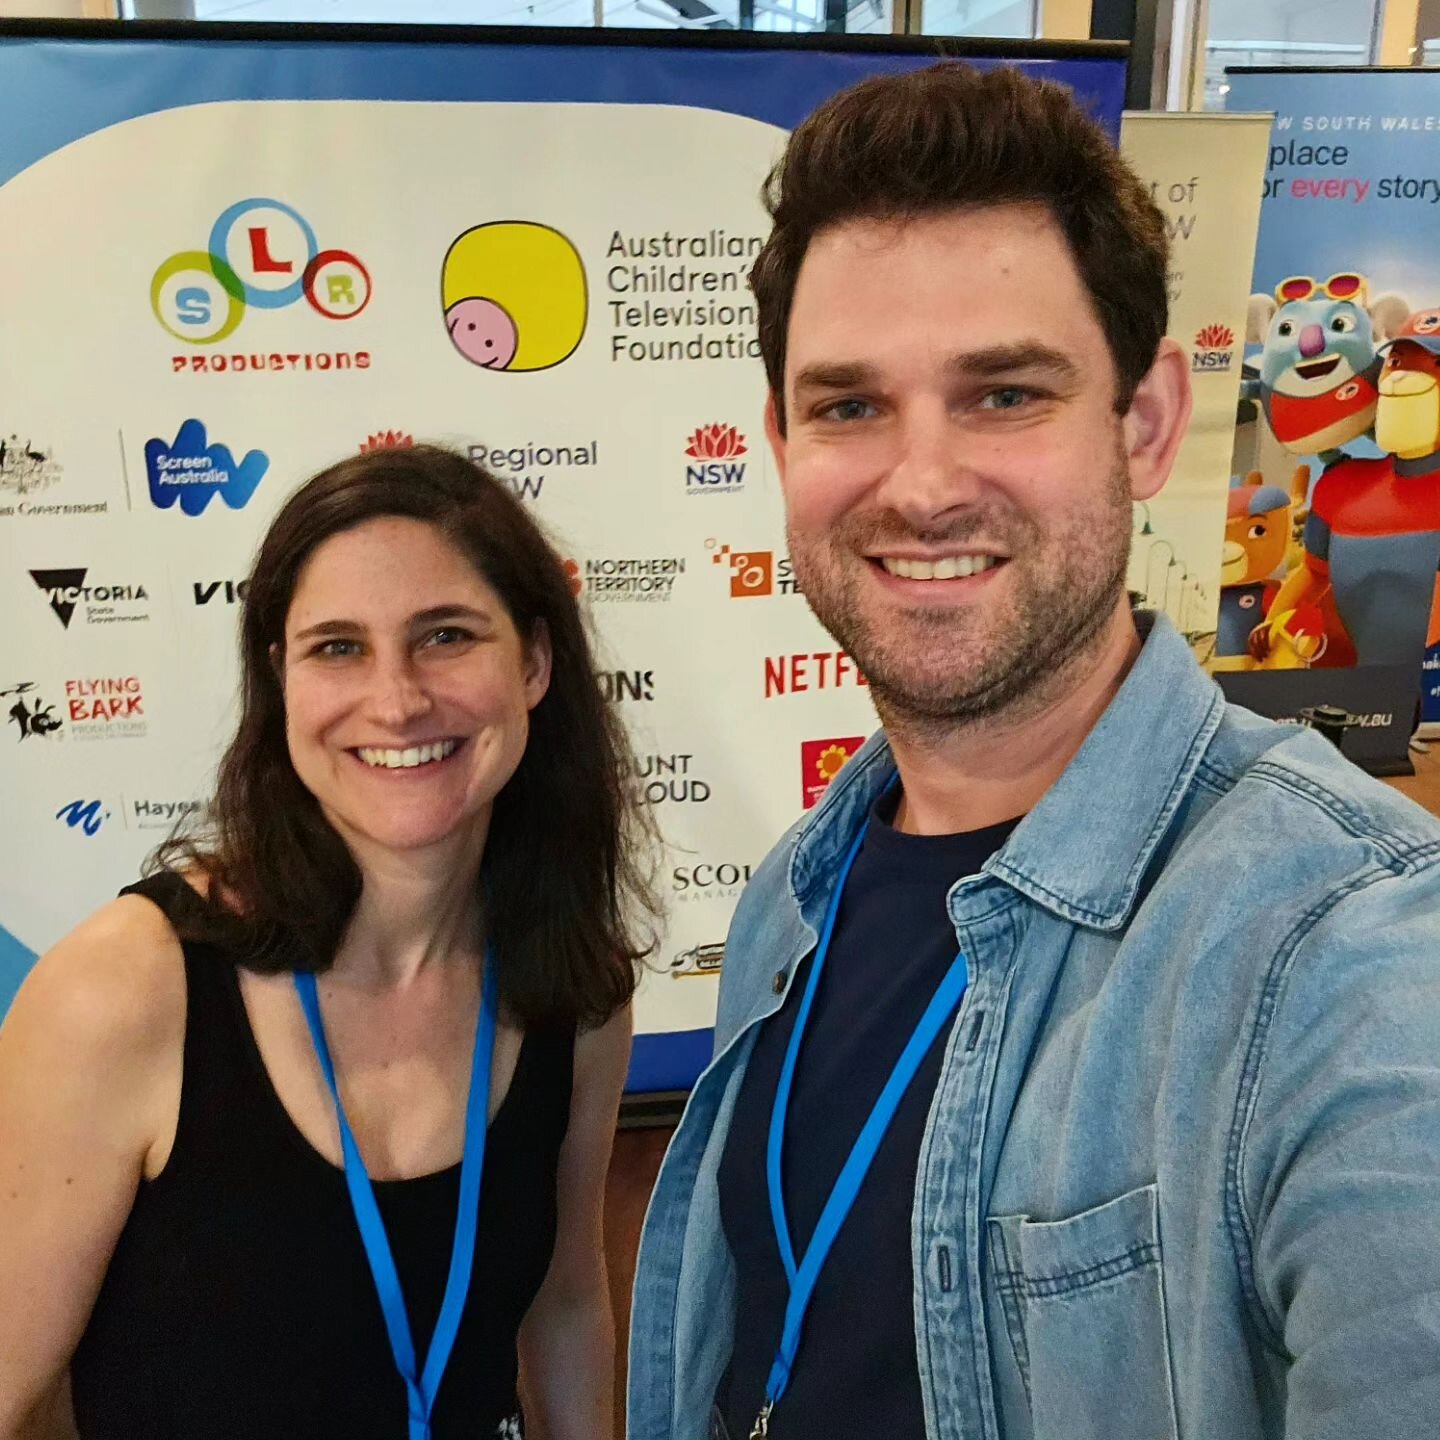 It was great spending the week at @accs_summit with so many creatives in the children's content arena. 

#accs23 #coffscoast #conference #bluebandicoot #bluebandicootstudios #animationaustralia